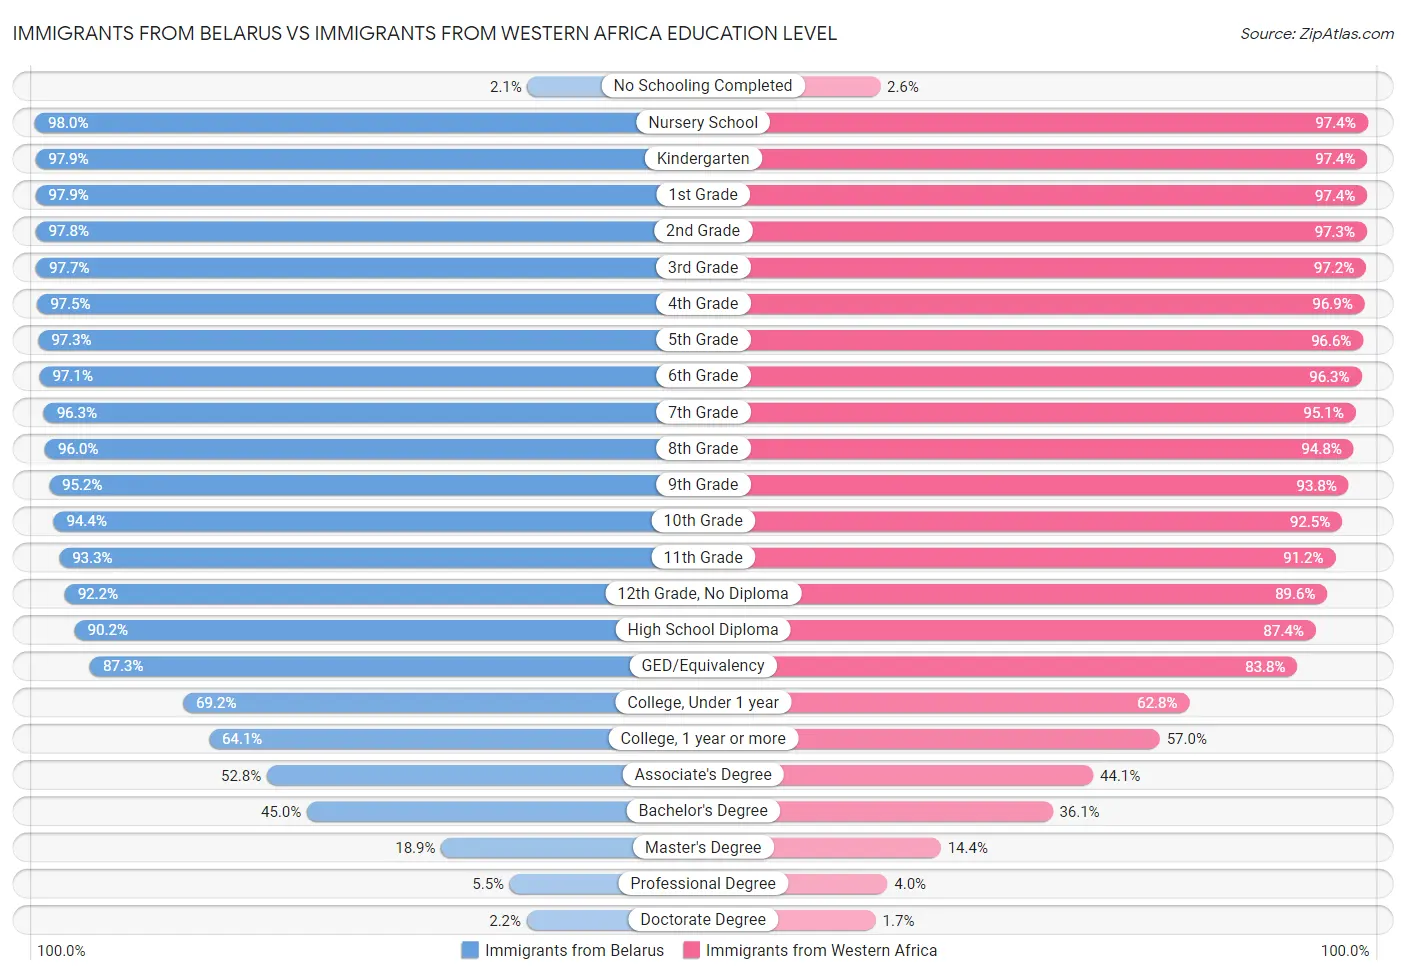 Immigrants from Belarus vs Immigrants from Western Africa Education Level